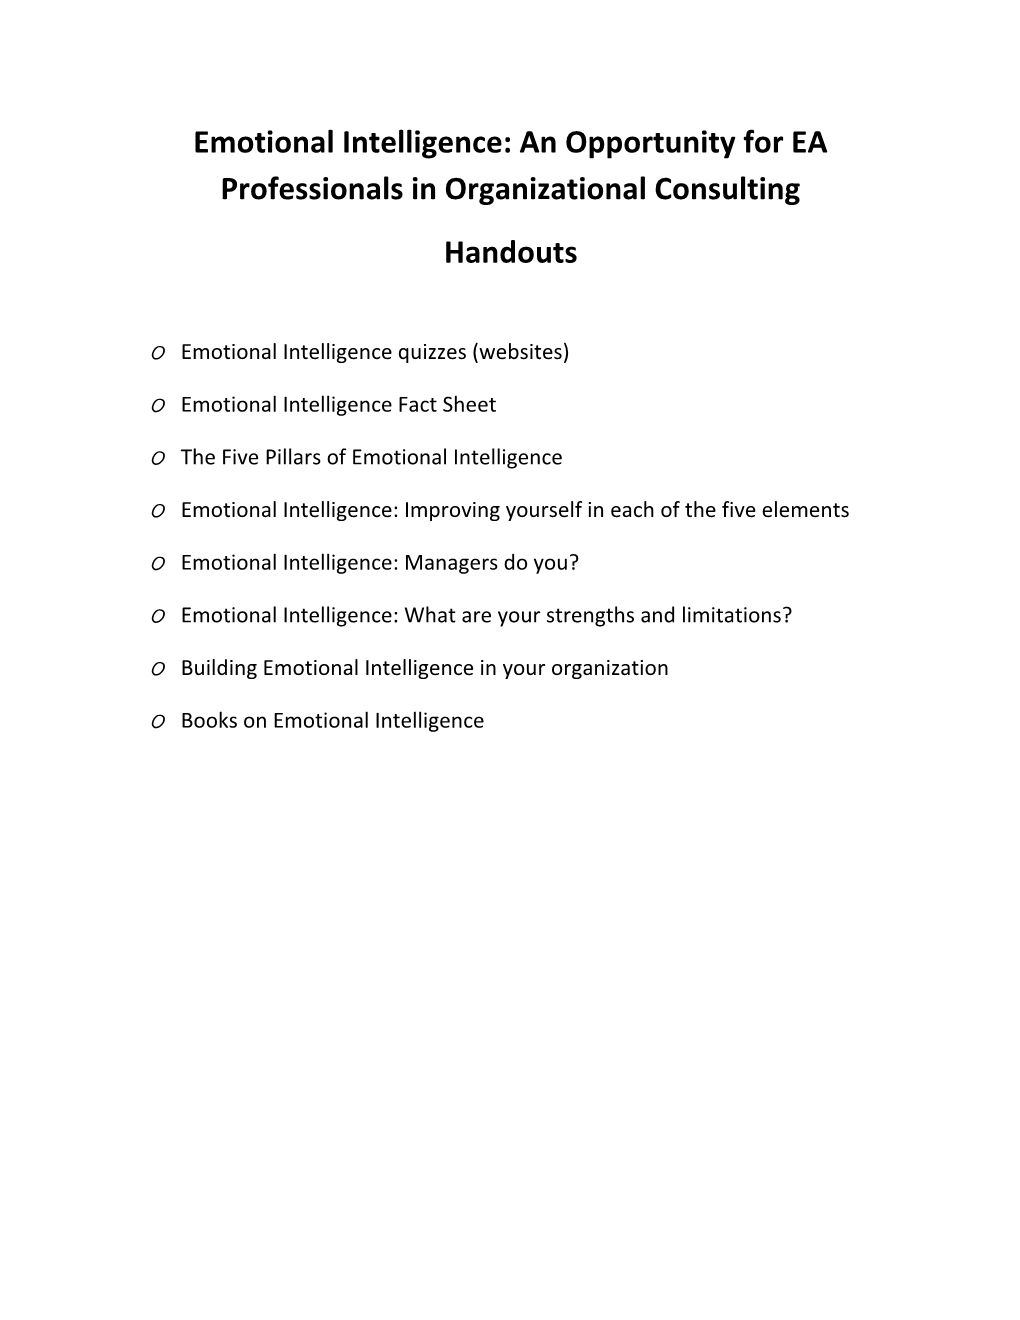 Emotional Intelligence: an Opportunity for EA Professionals in Organizational Consulting